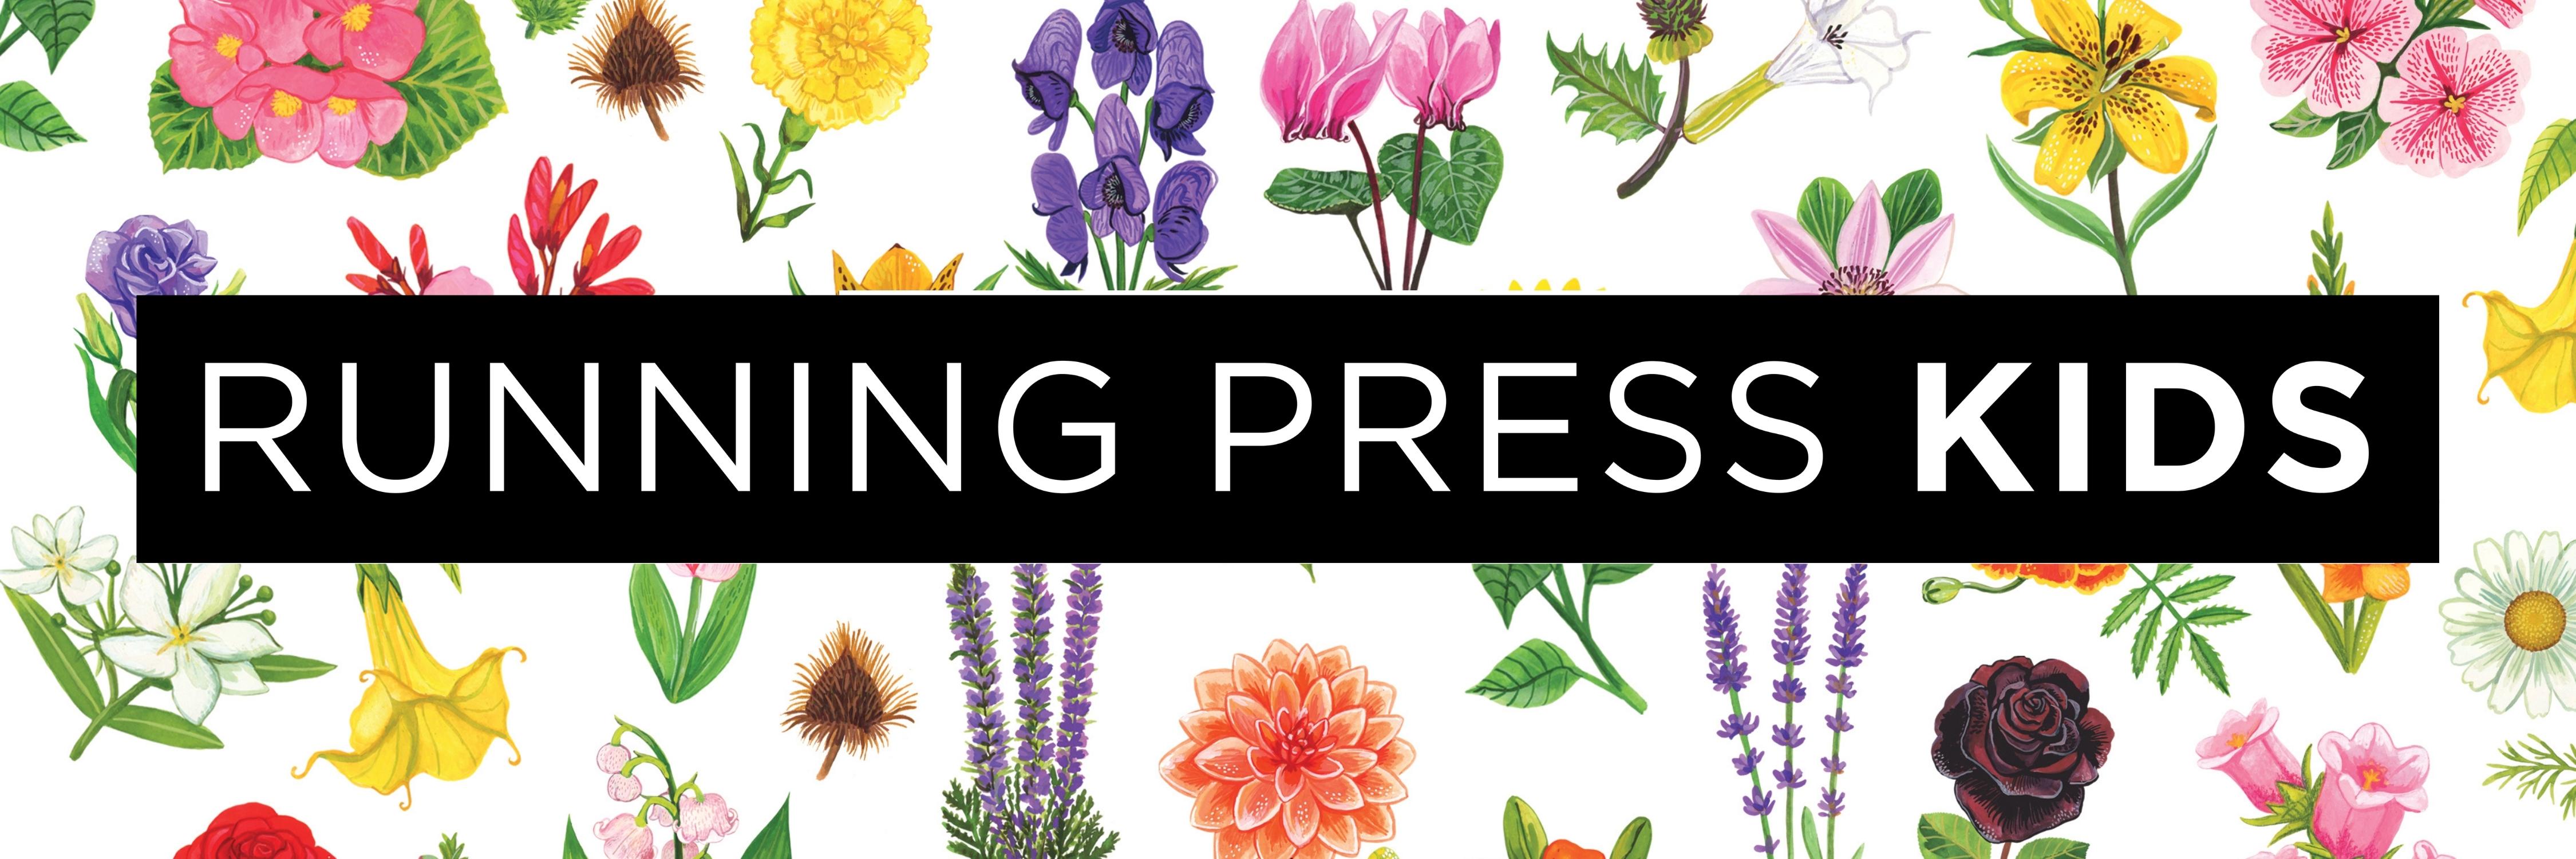 Designed banner reading Running Press Kids over a background of illustrated flowers